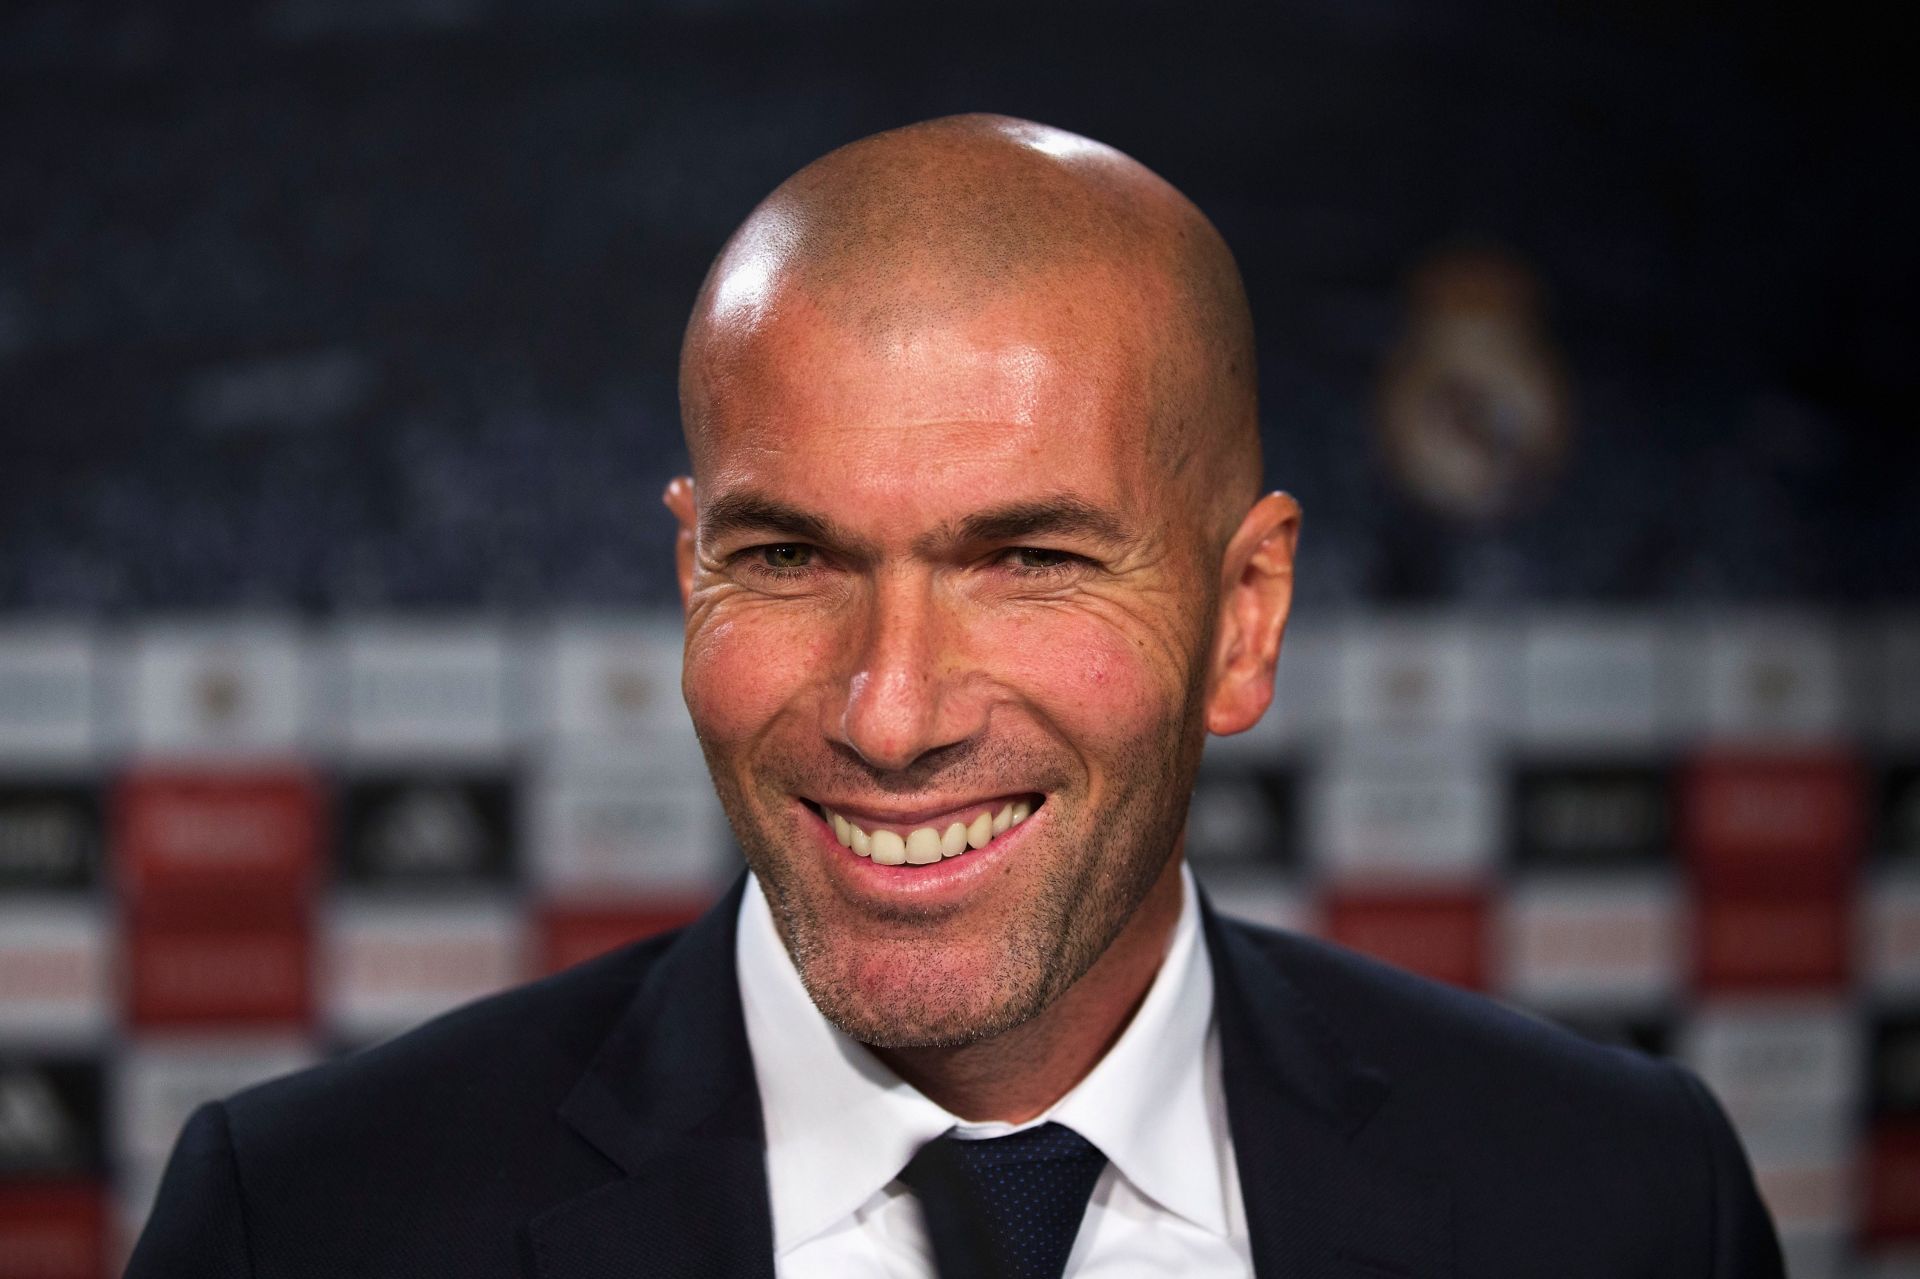 Zidane led Los Blancos to success both on the pitch and on the sidelines